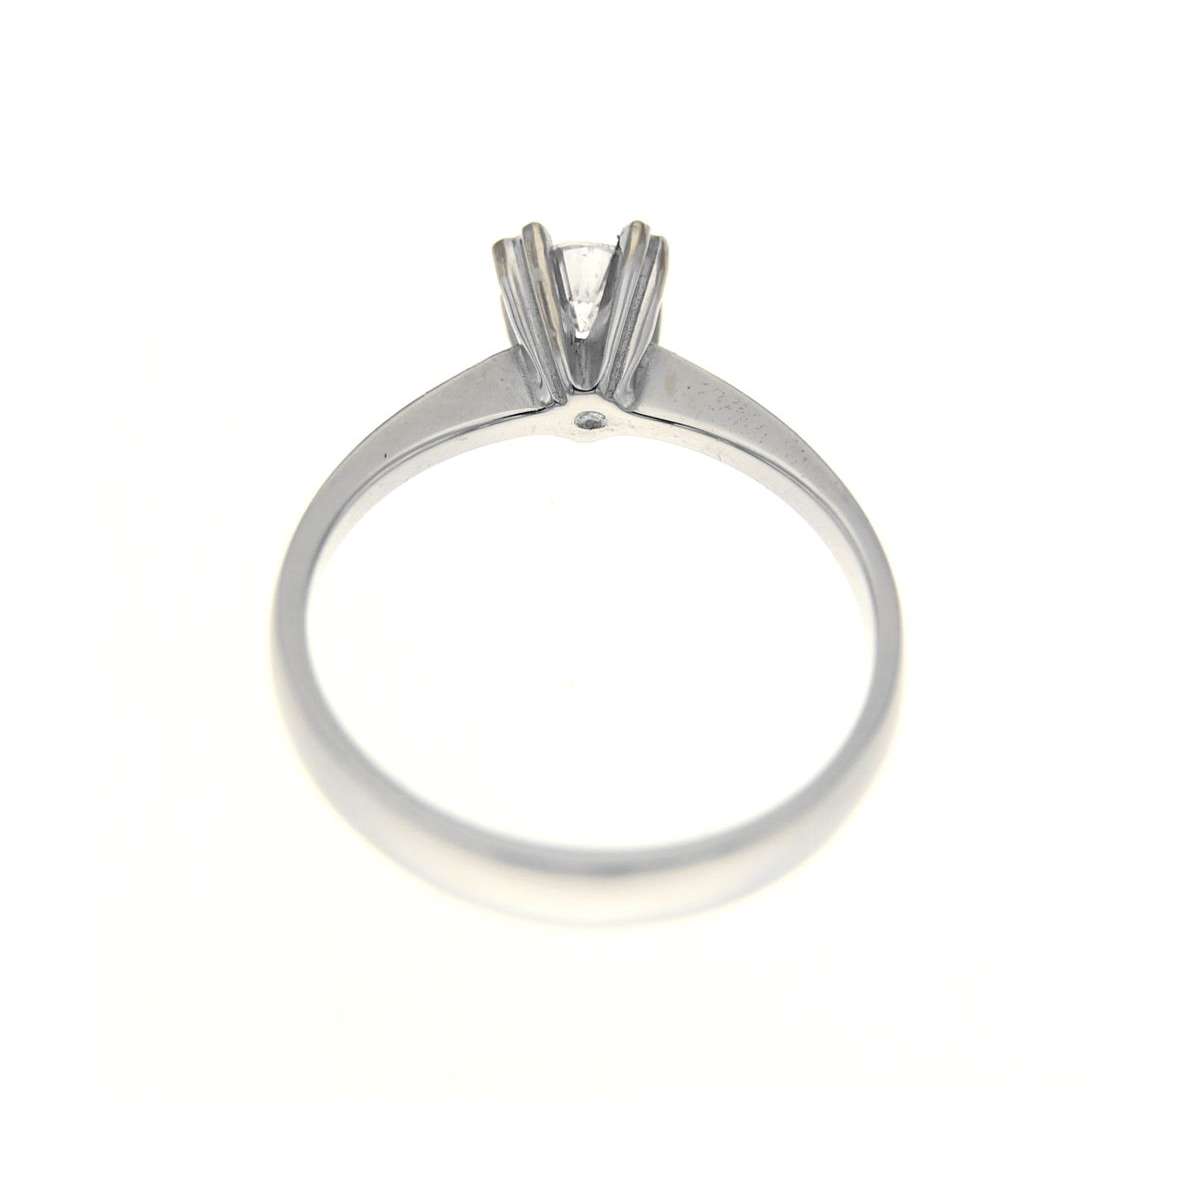 Solitaire Ring white gold 0.30D-VS1 certificate GIA